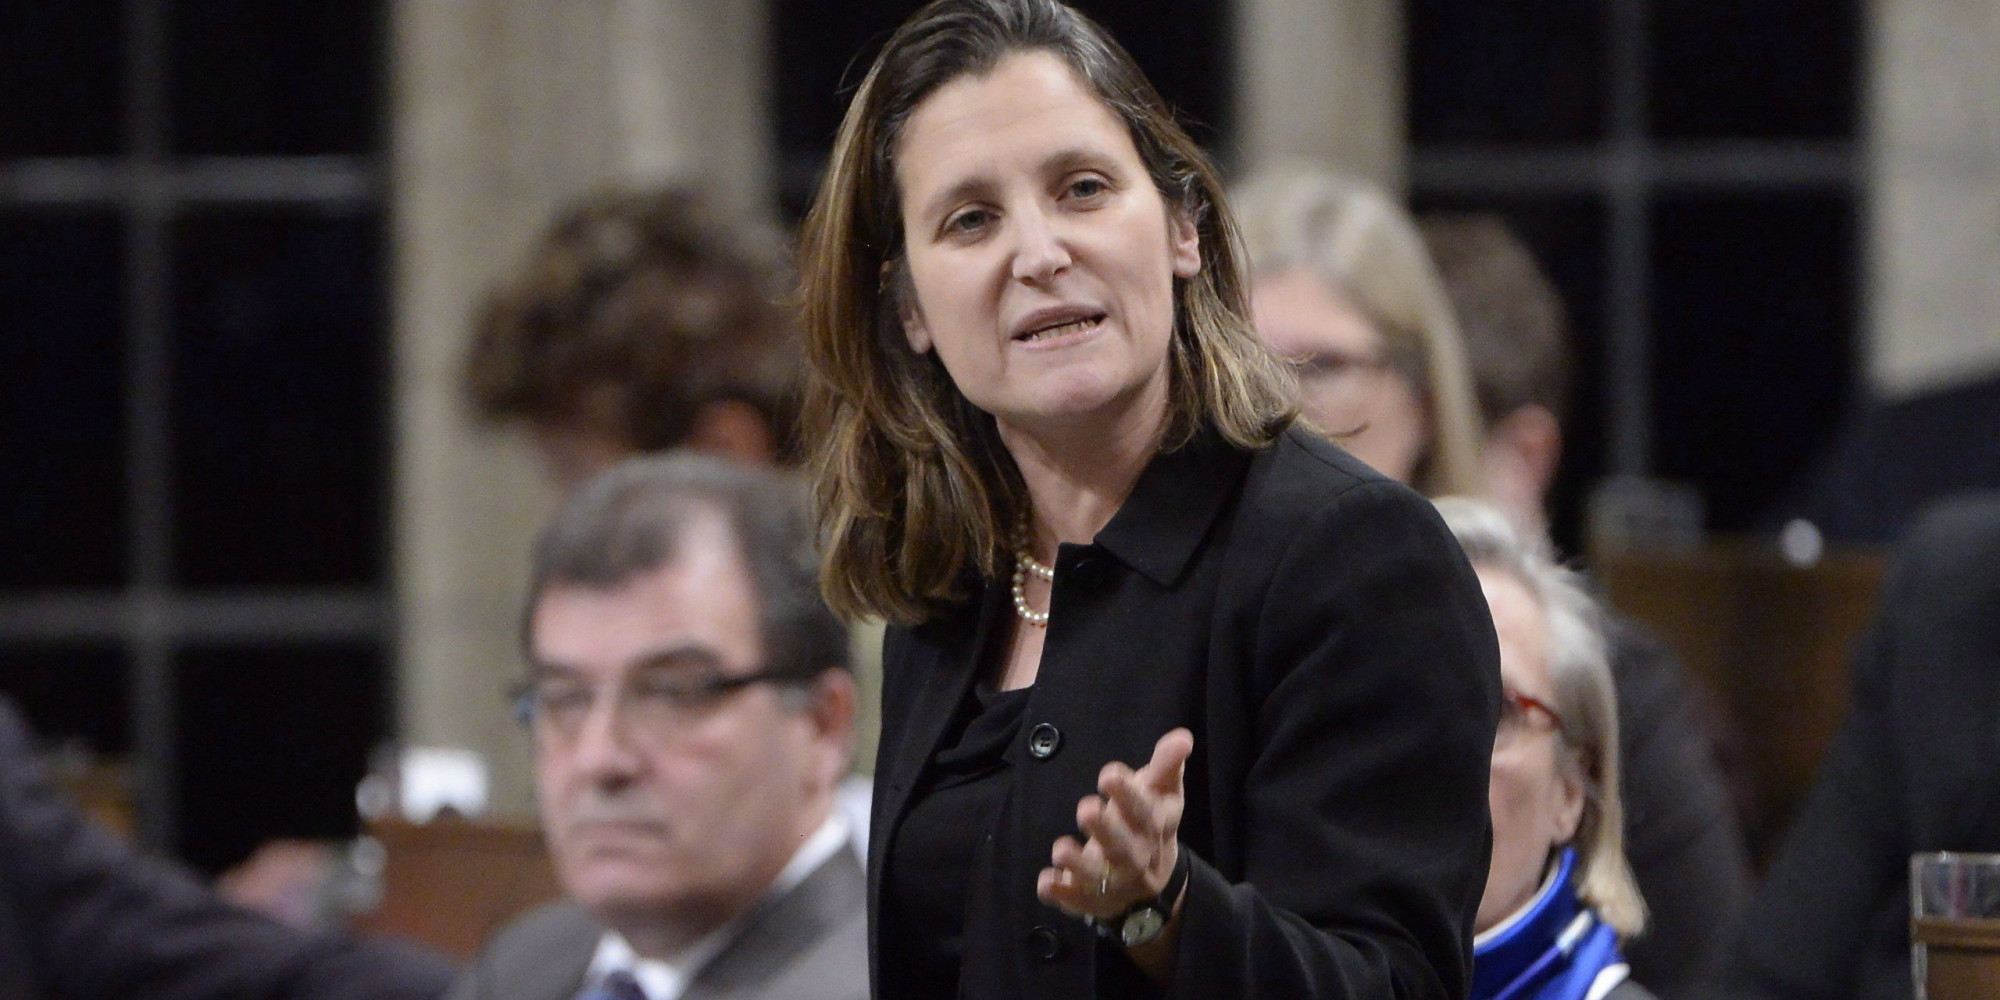 Canada In Talks To Resolve China Canola Trade Dispute: Freeland